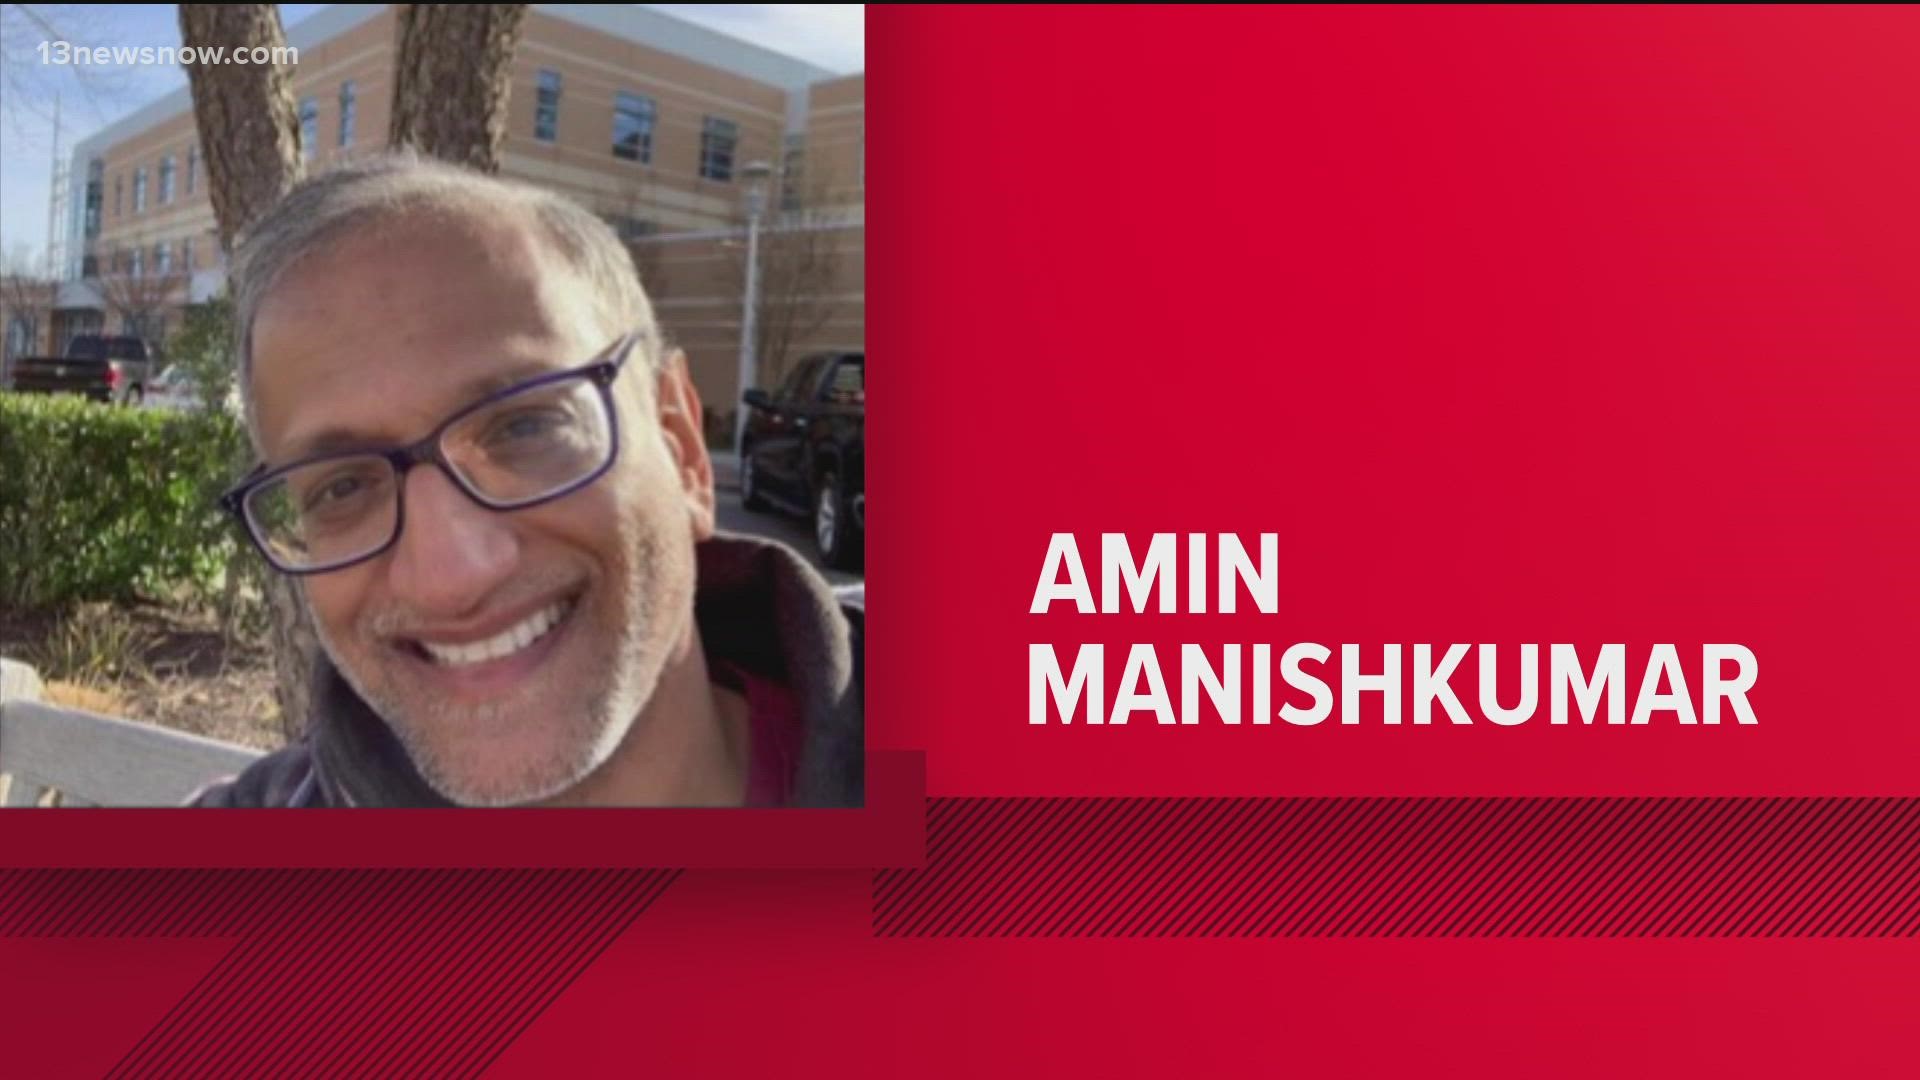 Amin Manishkumar was last seen by his family leaving their home on foot in the 900 block of Beaumead Court, according to police.